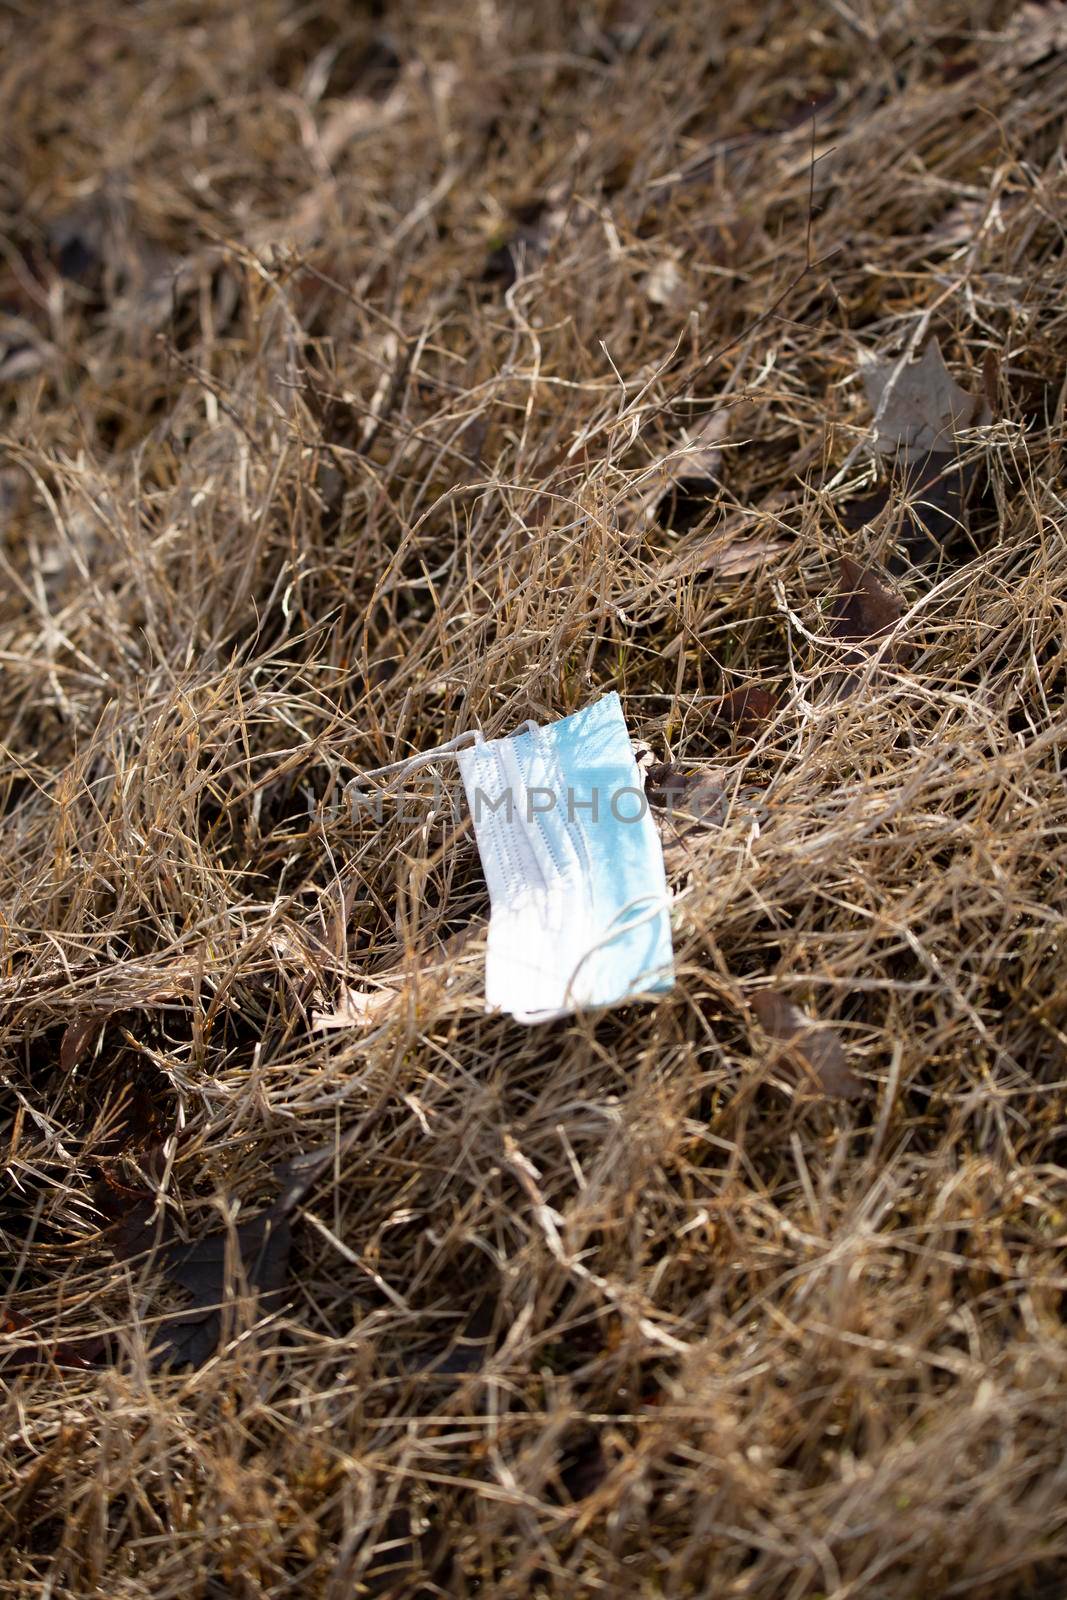 Blue, paper surgical mask forming litter on the ground